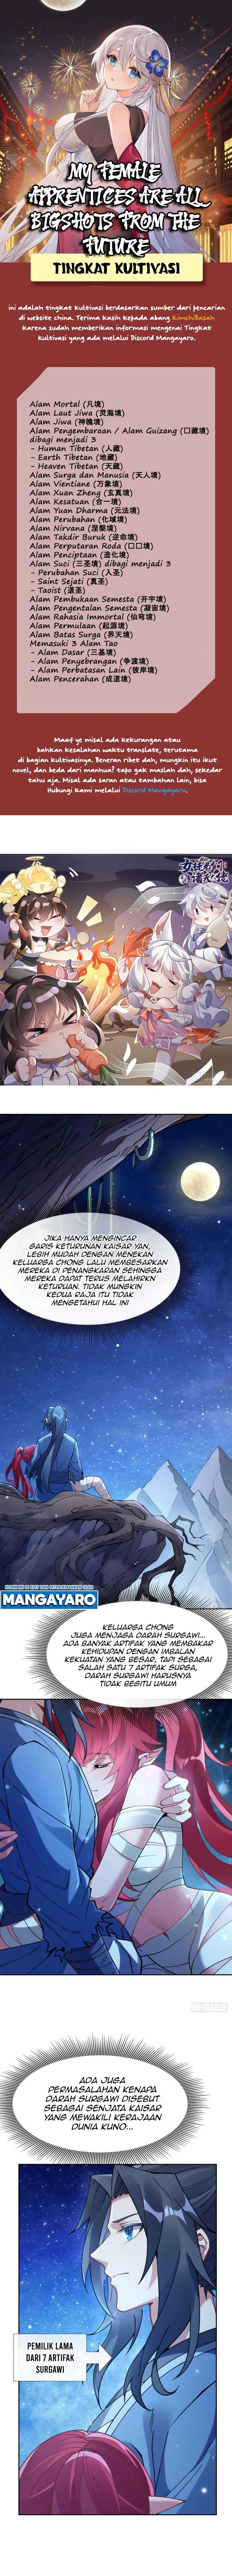 Dilarang COPAS - situs resmi www.mangacanblog.com - Komik my female apprentices are all big shots from the future 152 - chapter 152 153 Indonesia my female apprentices are all big shots from the future 152 - chapter 152 Terbaru 1|Baca Manga Komik Indonesia|Mangacan